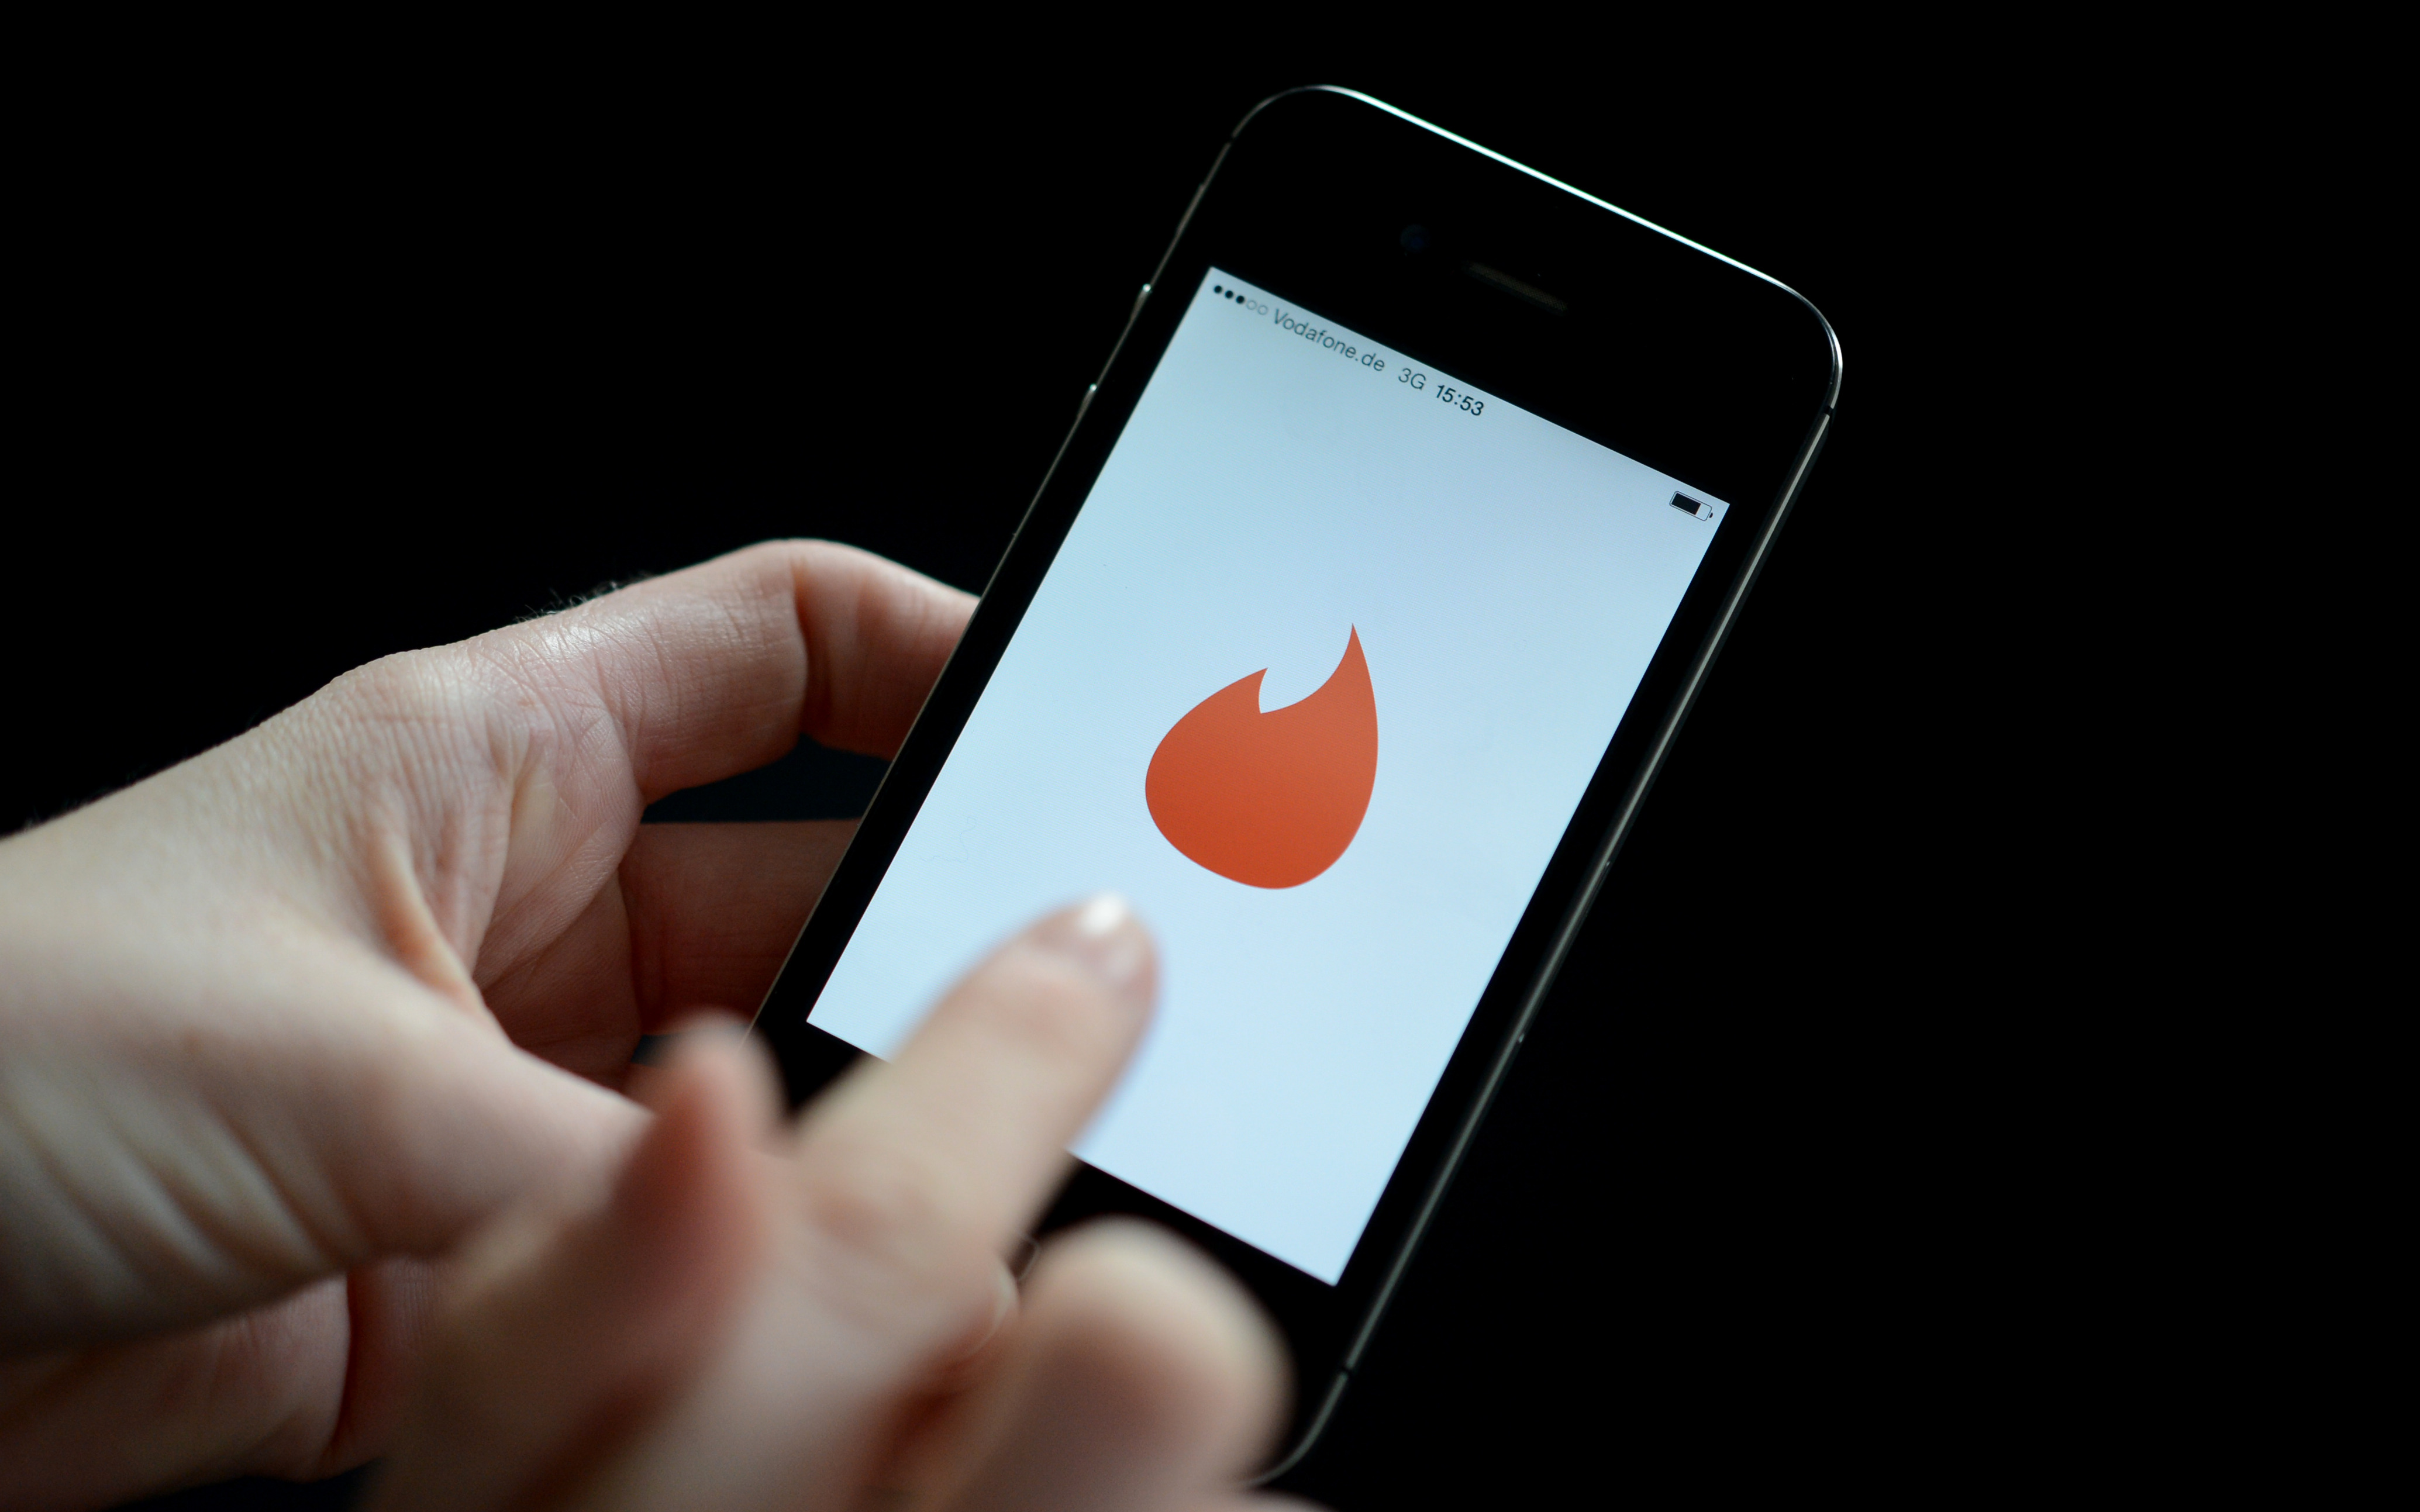 Tinder: Men Swipe Right 3 Times as Much as Women | Time